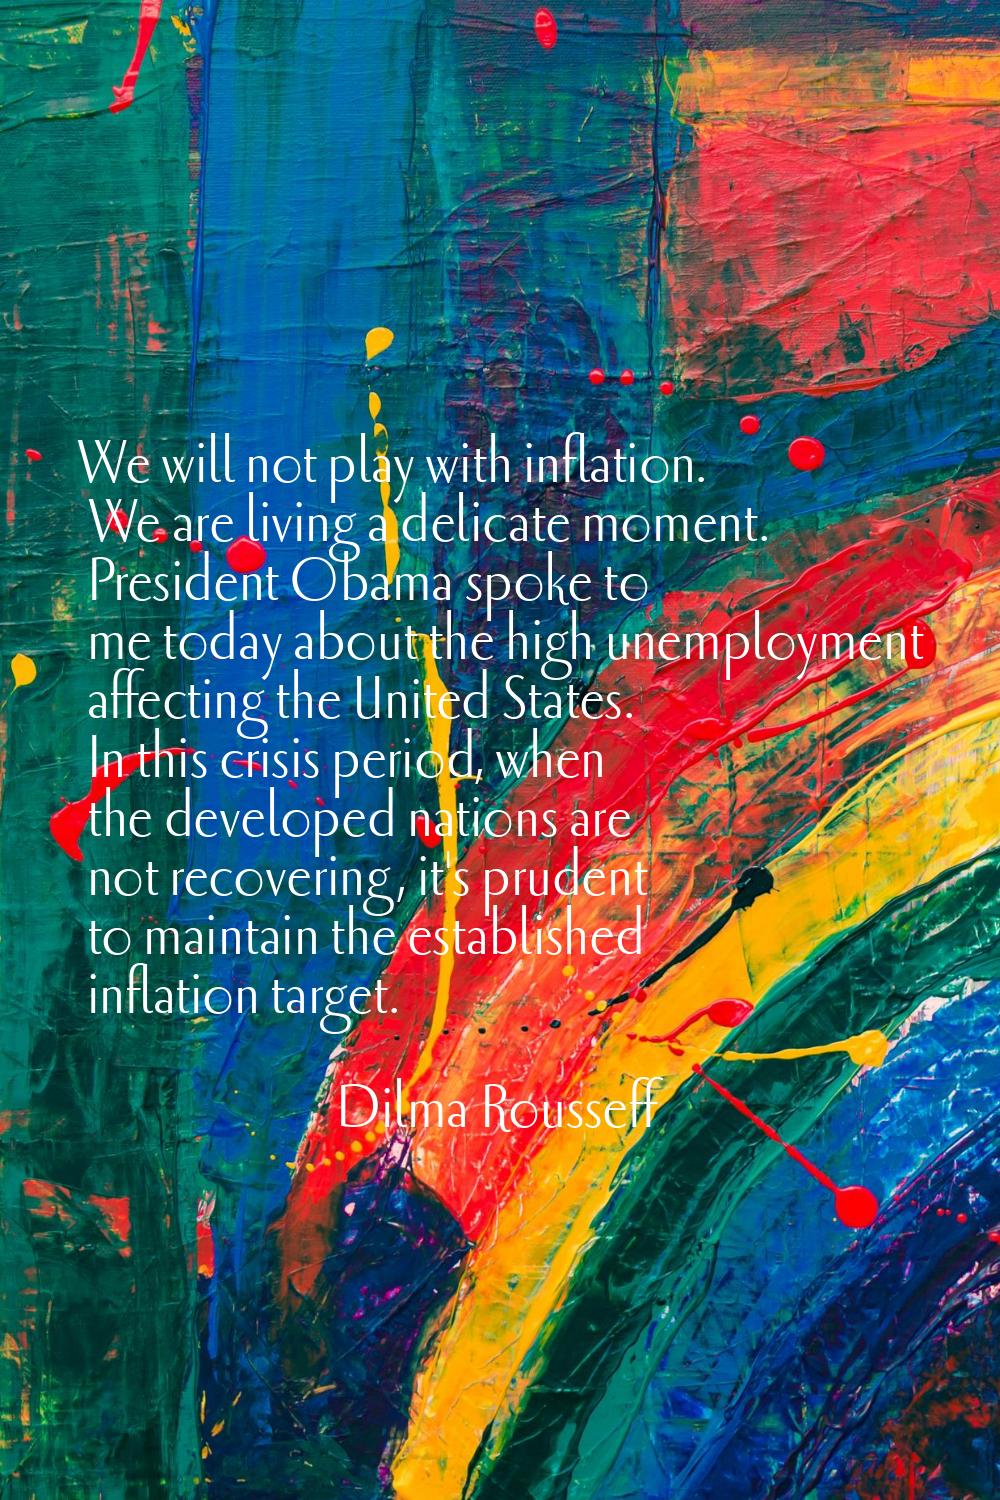 We will not play with inflation. We are living a delicate moment. President Obama spoke to me today